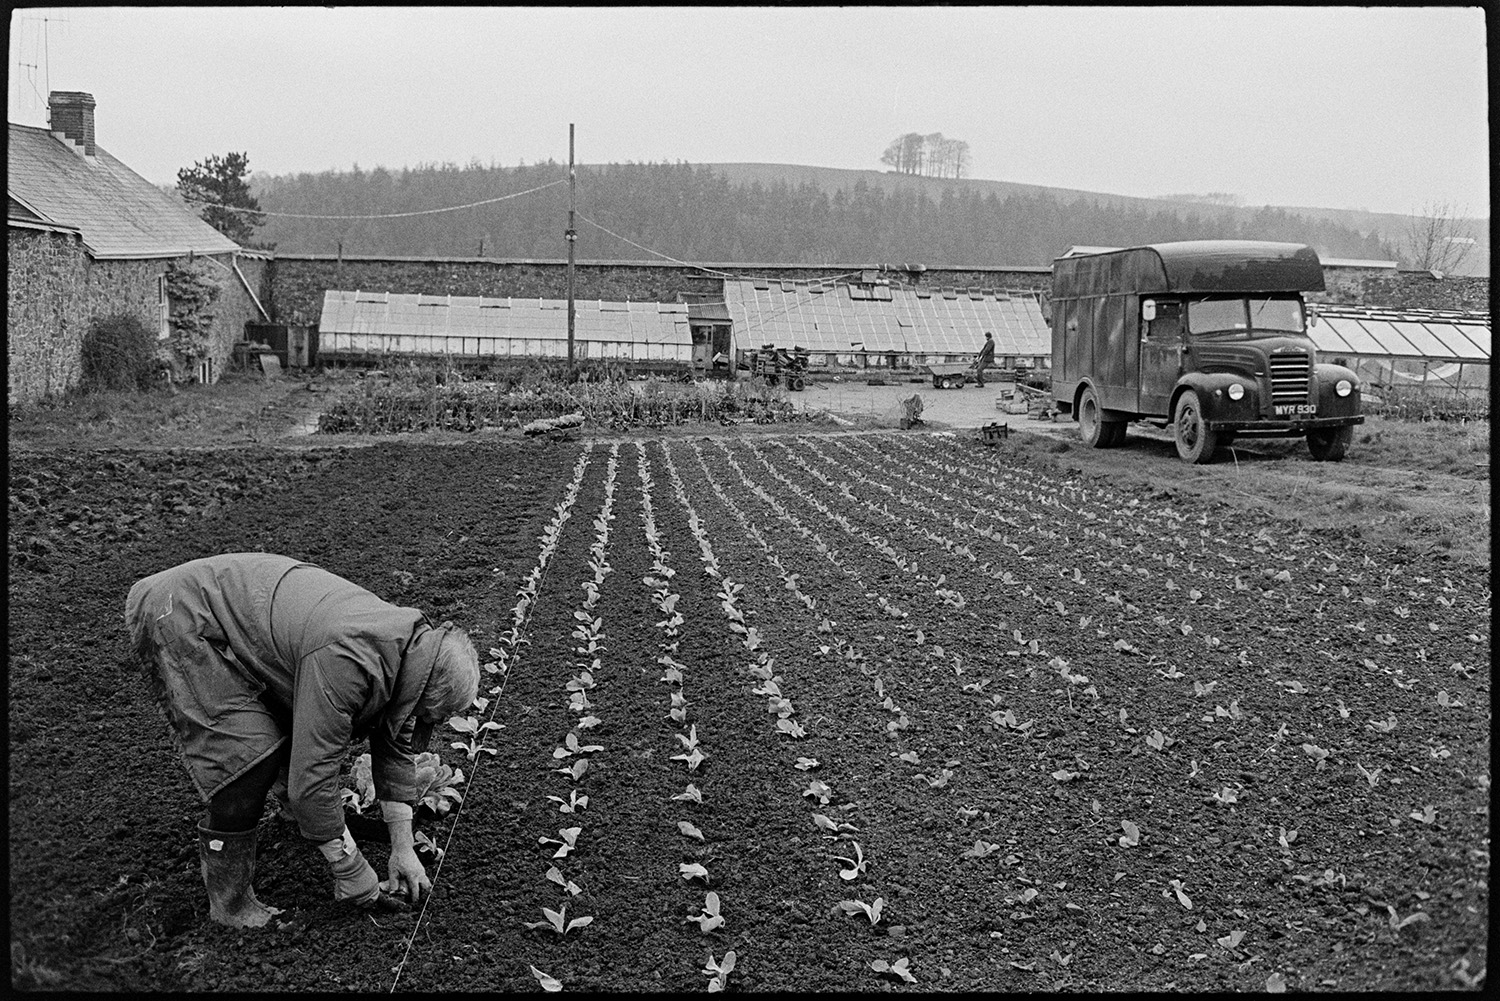 Man planting lettuces at walled garden centre. 
[A man planting rows of lettuces in a walled garden at Eggesford Garden Centre. A truck, greenhouses and other plants can be seen in the background.]